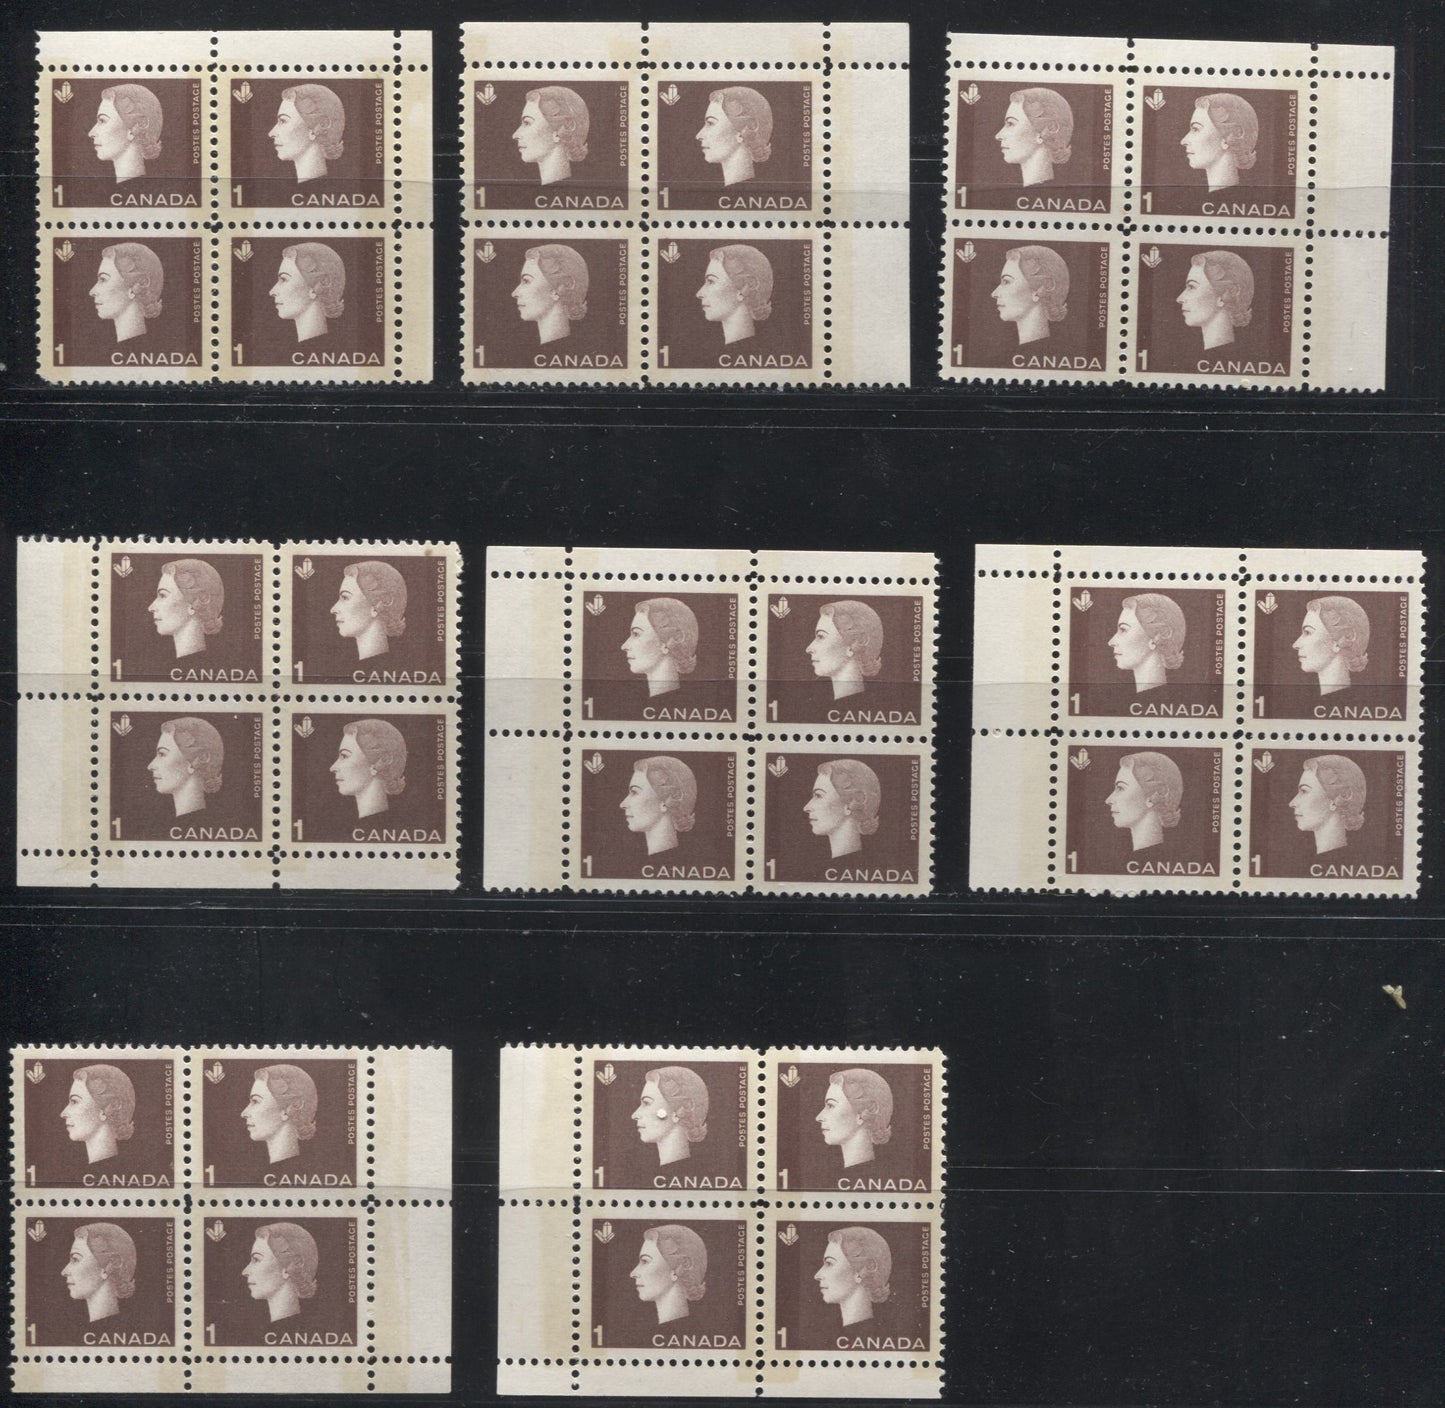 Canada #401p 1c Brown Queen Elizabeth II, 1962-1967 Cameo Issue, A VFNH Group of 8 Winnipeg Tagged Field Stock Corner Blocks With Different Selvedge Widths, Shades and Tagging Strengths, All on NF Paper